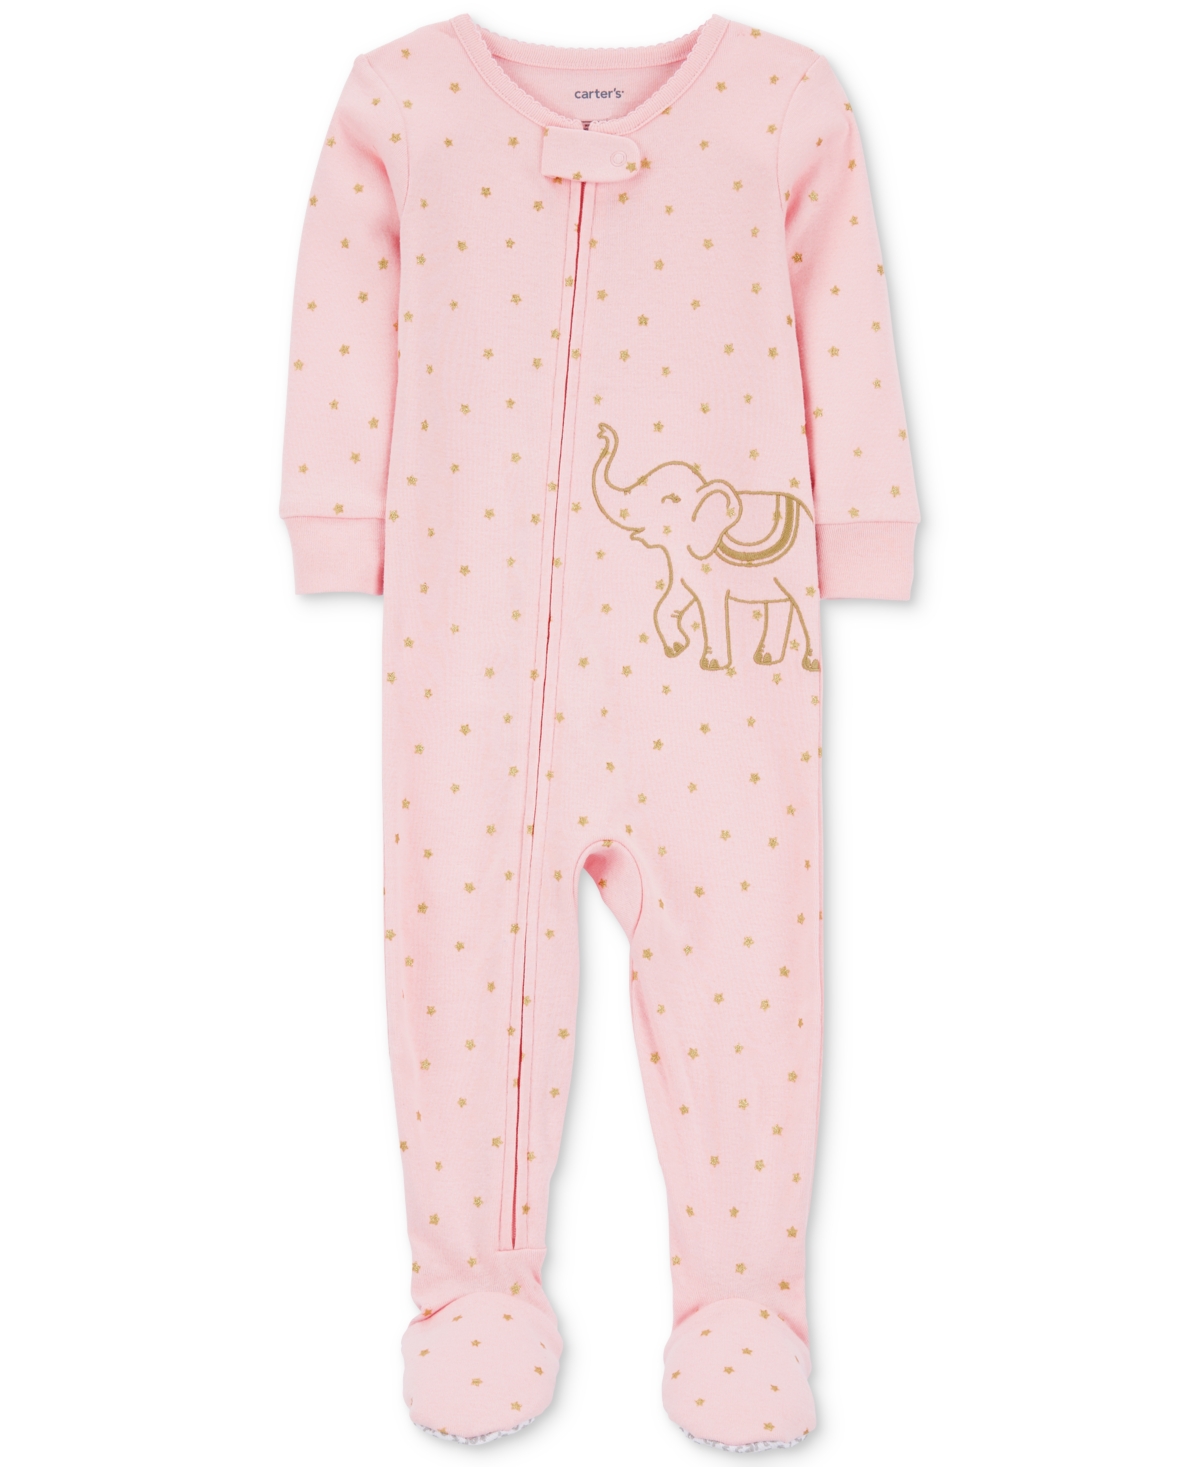 Carter's Babies' Toddler Girls One-piece Elephant 100% Snug-fit Footed Pajamas In Pink